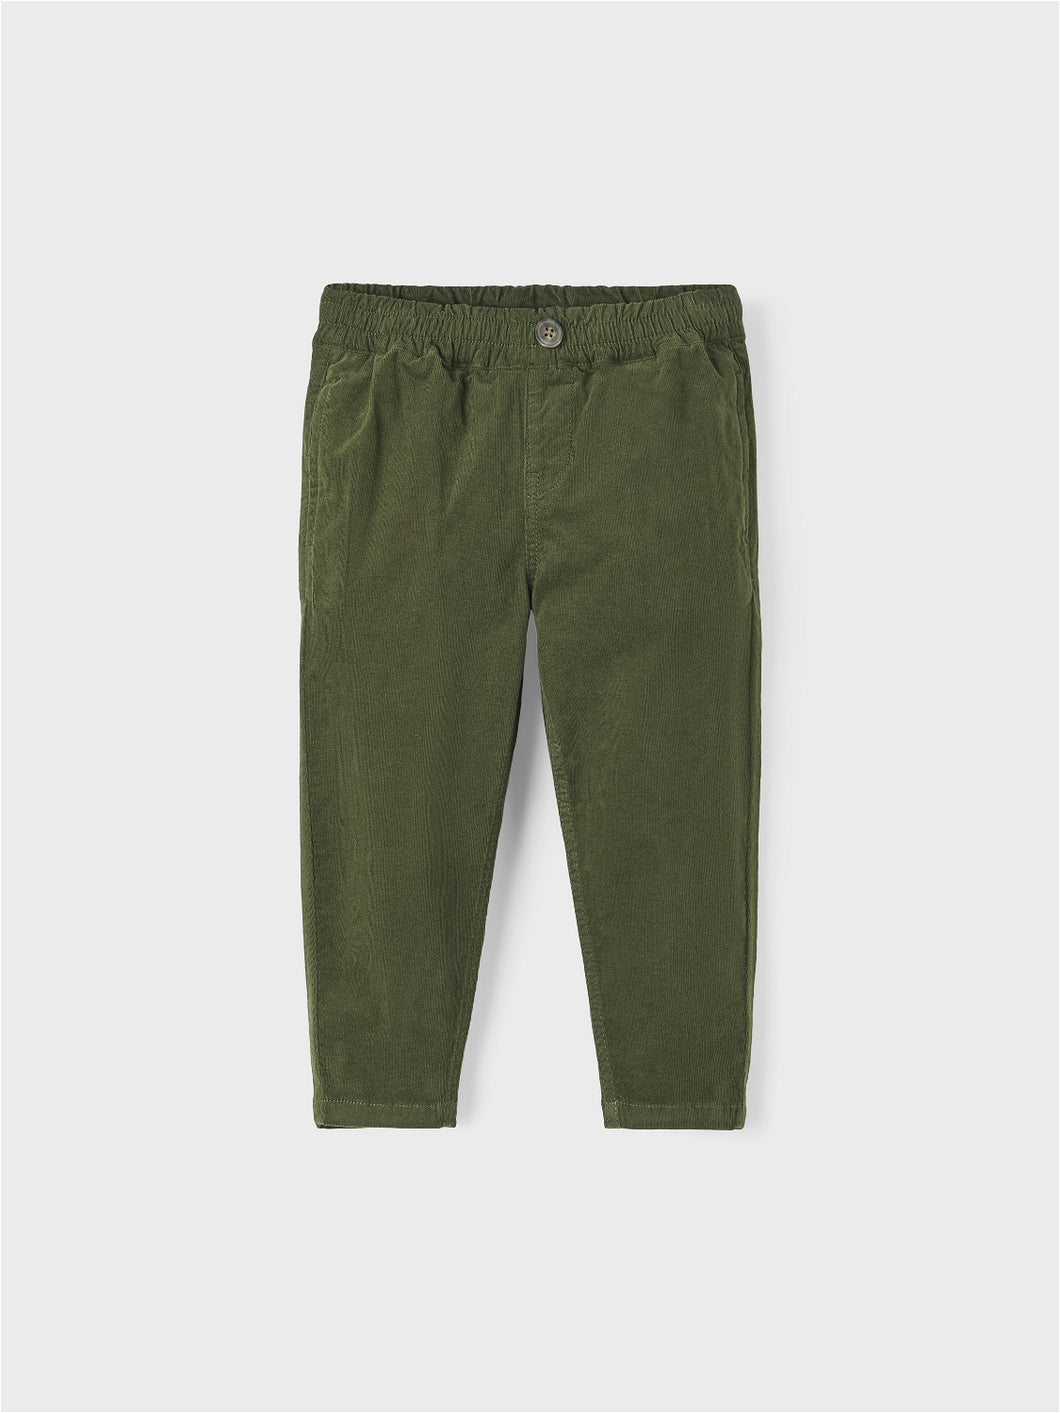 NMMBEN Trousers - Rifle Green